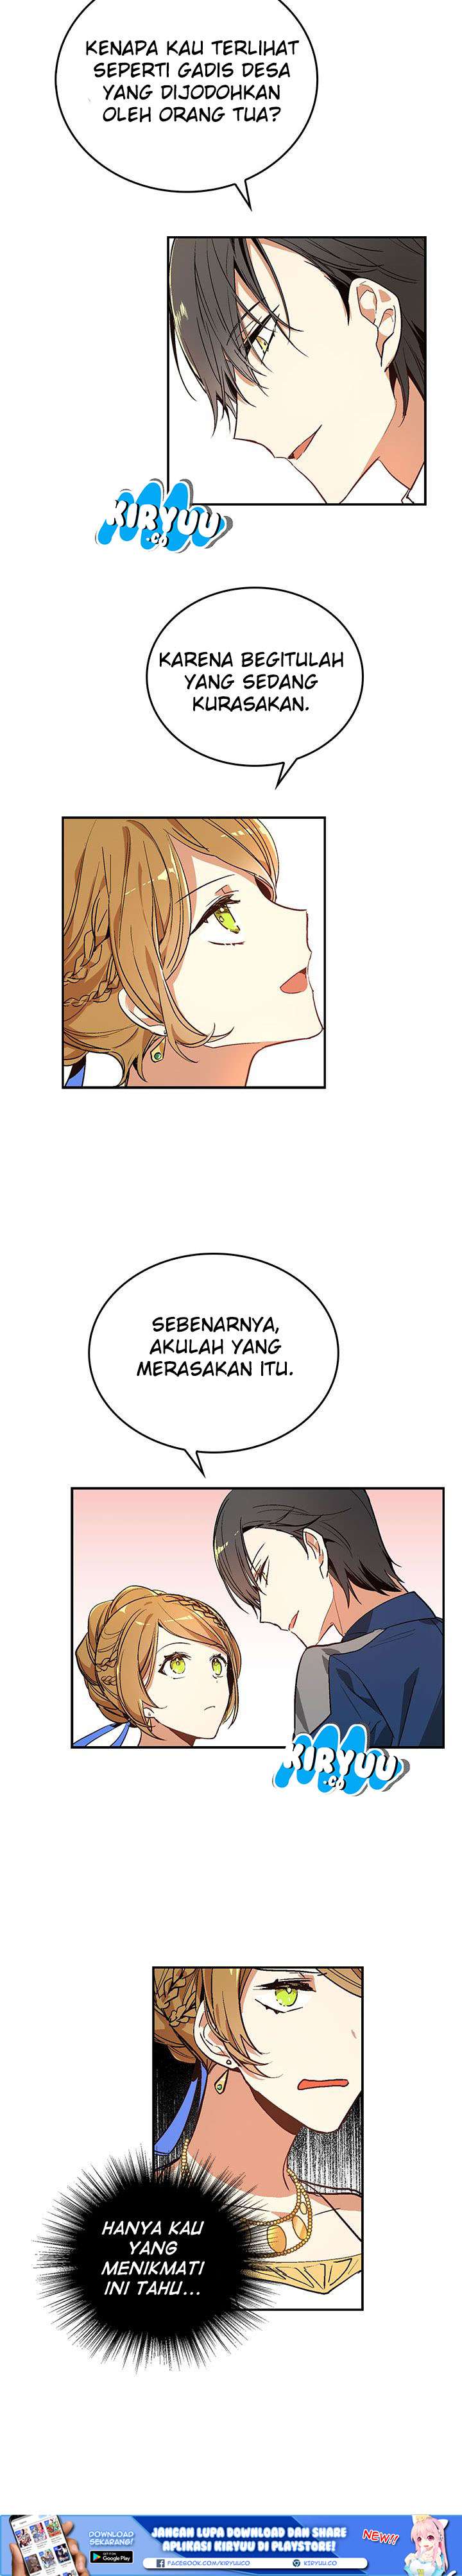 The Reason Why Raeliana Ended Up at the Duke’s Mansion Chapter 15 Bahasa Indonesia